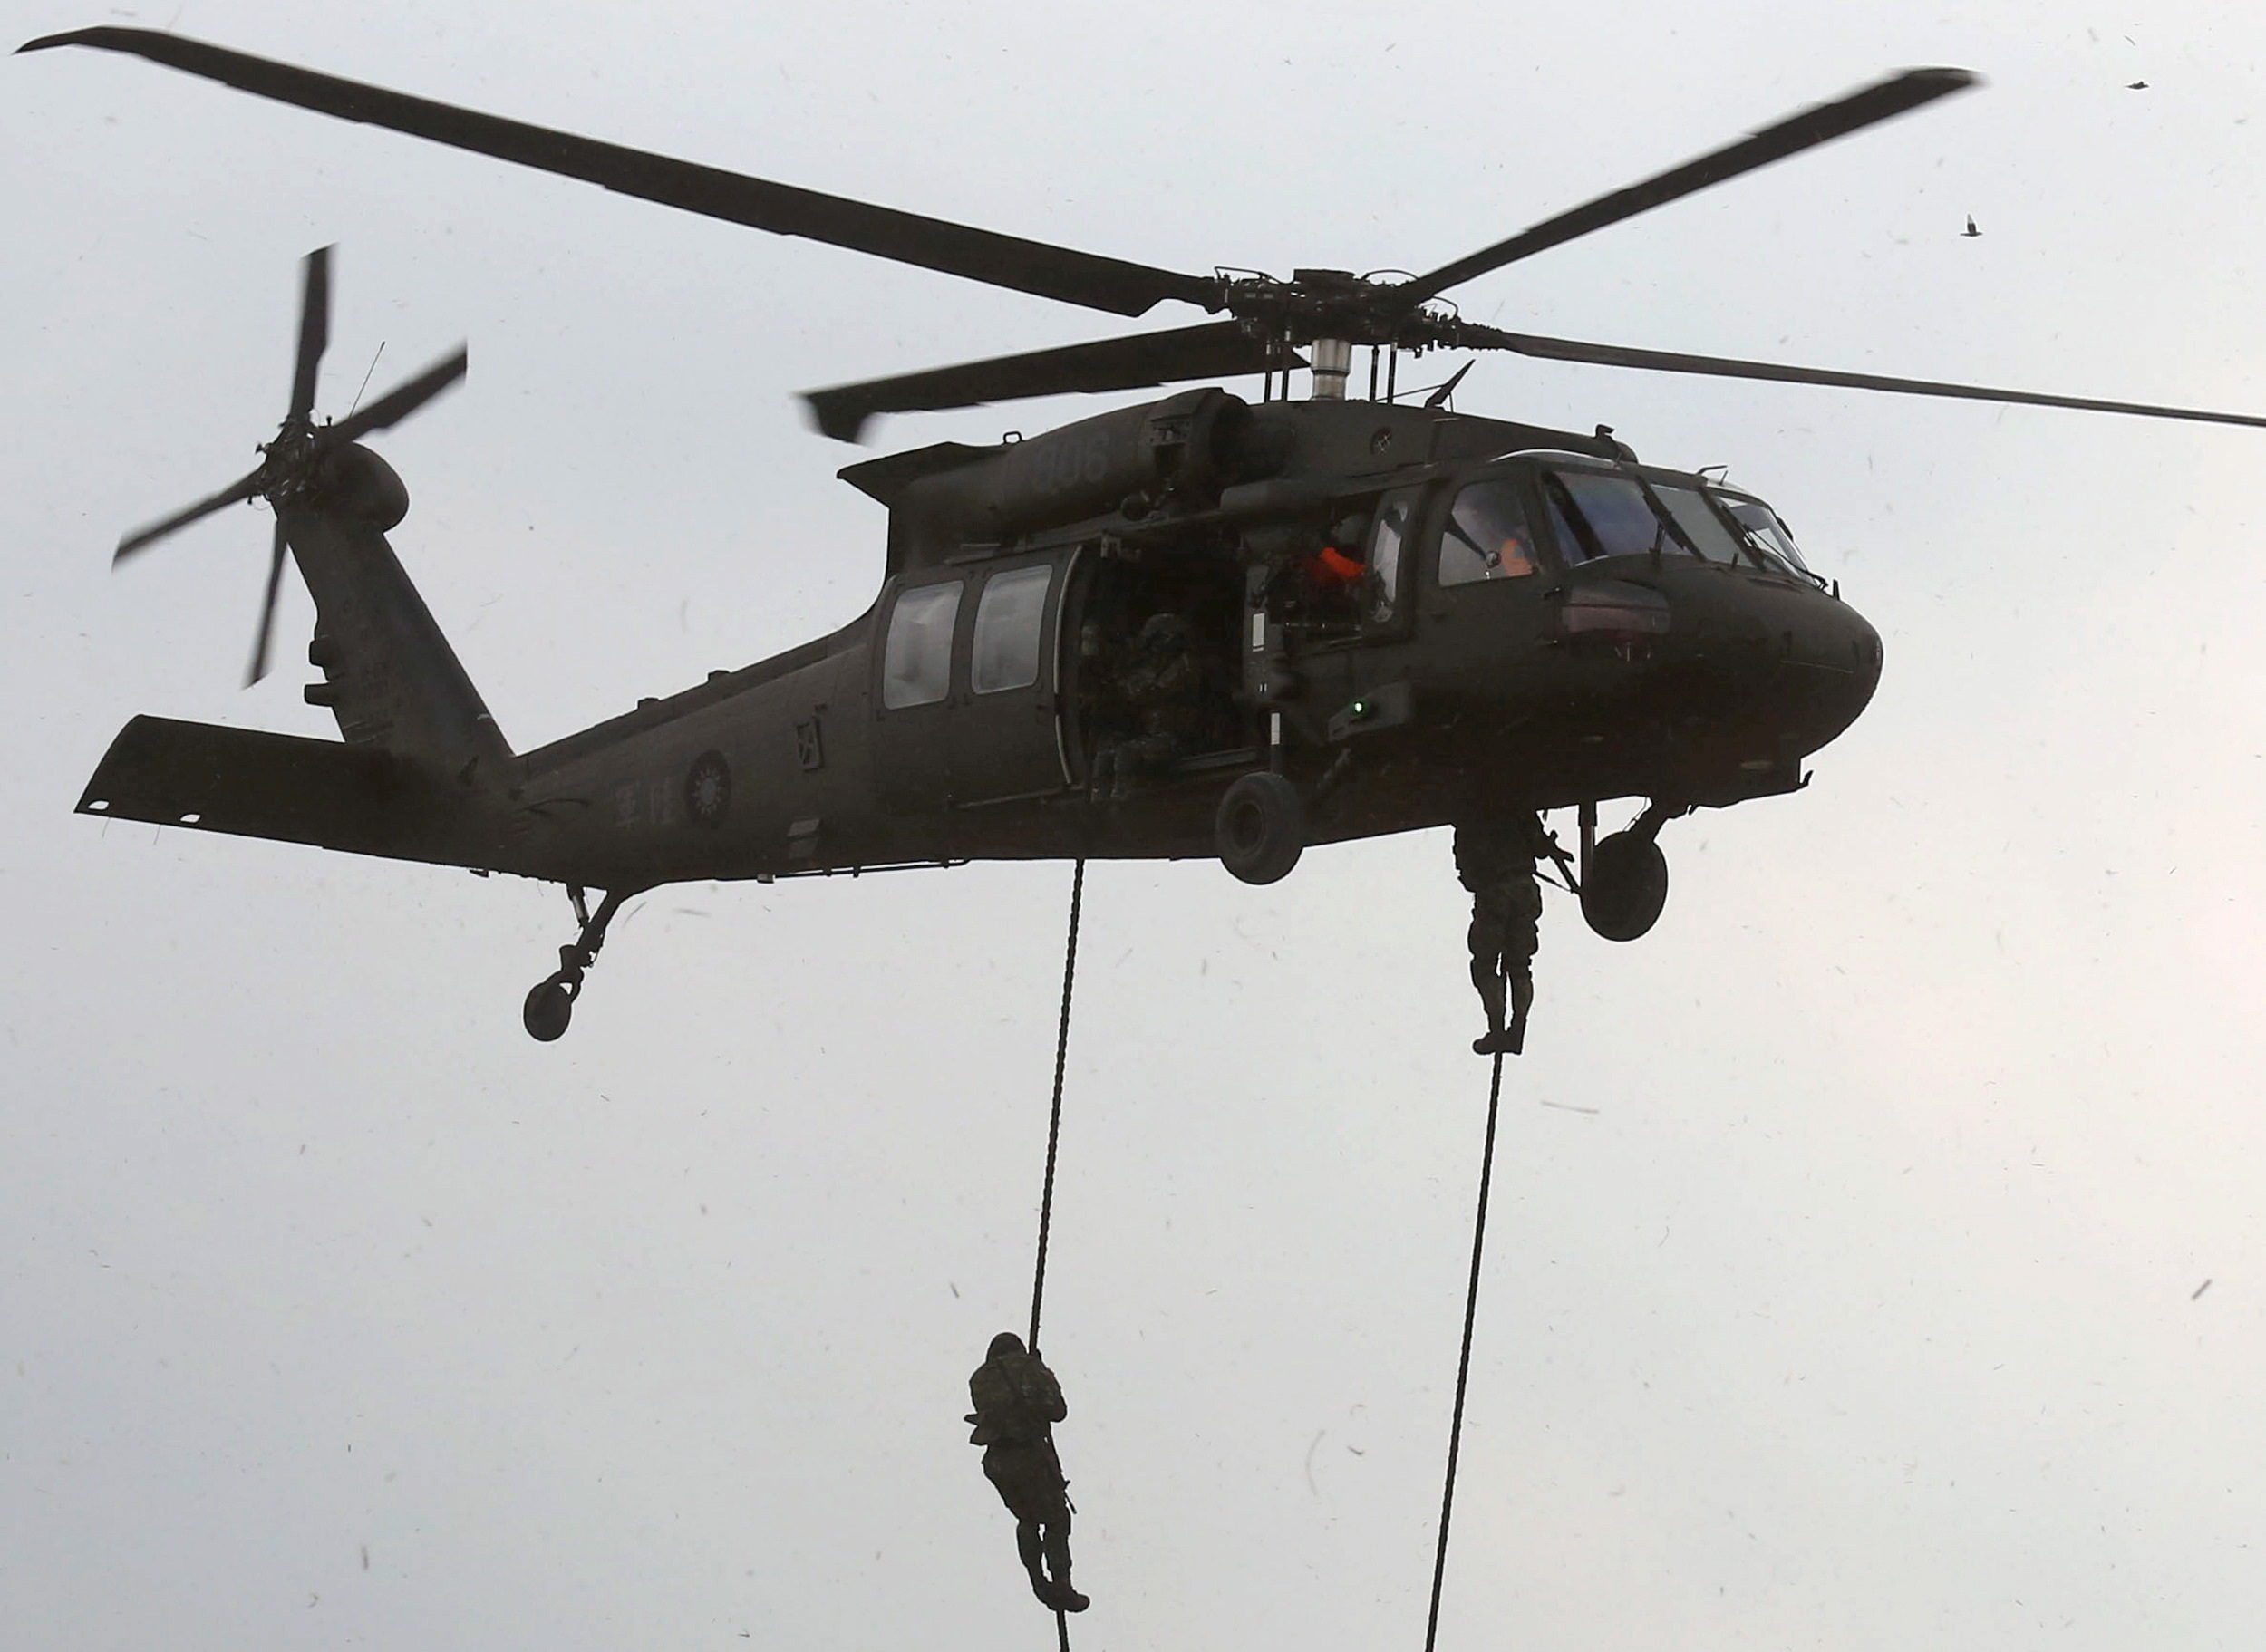 Military personnels rope down from a UH-60M Black Hawk helicopter during the annual Han Kuang military exercise in an army base in Hsinchu